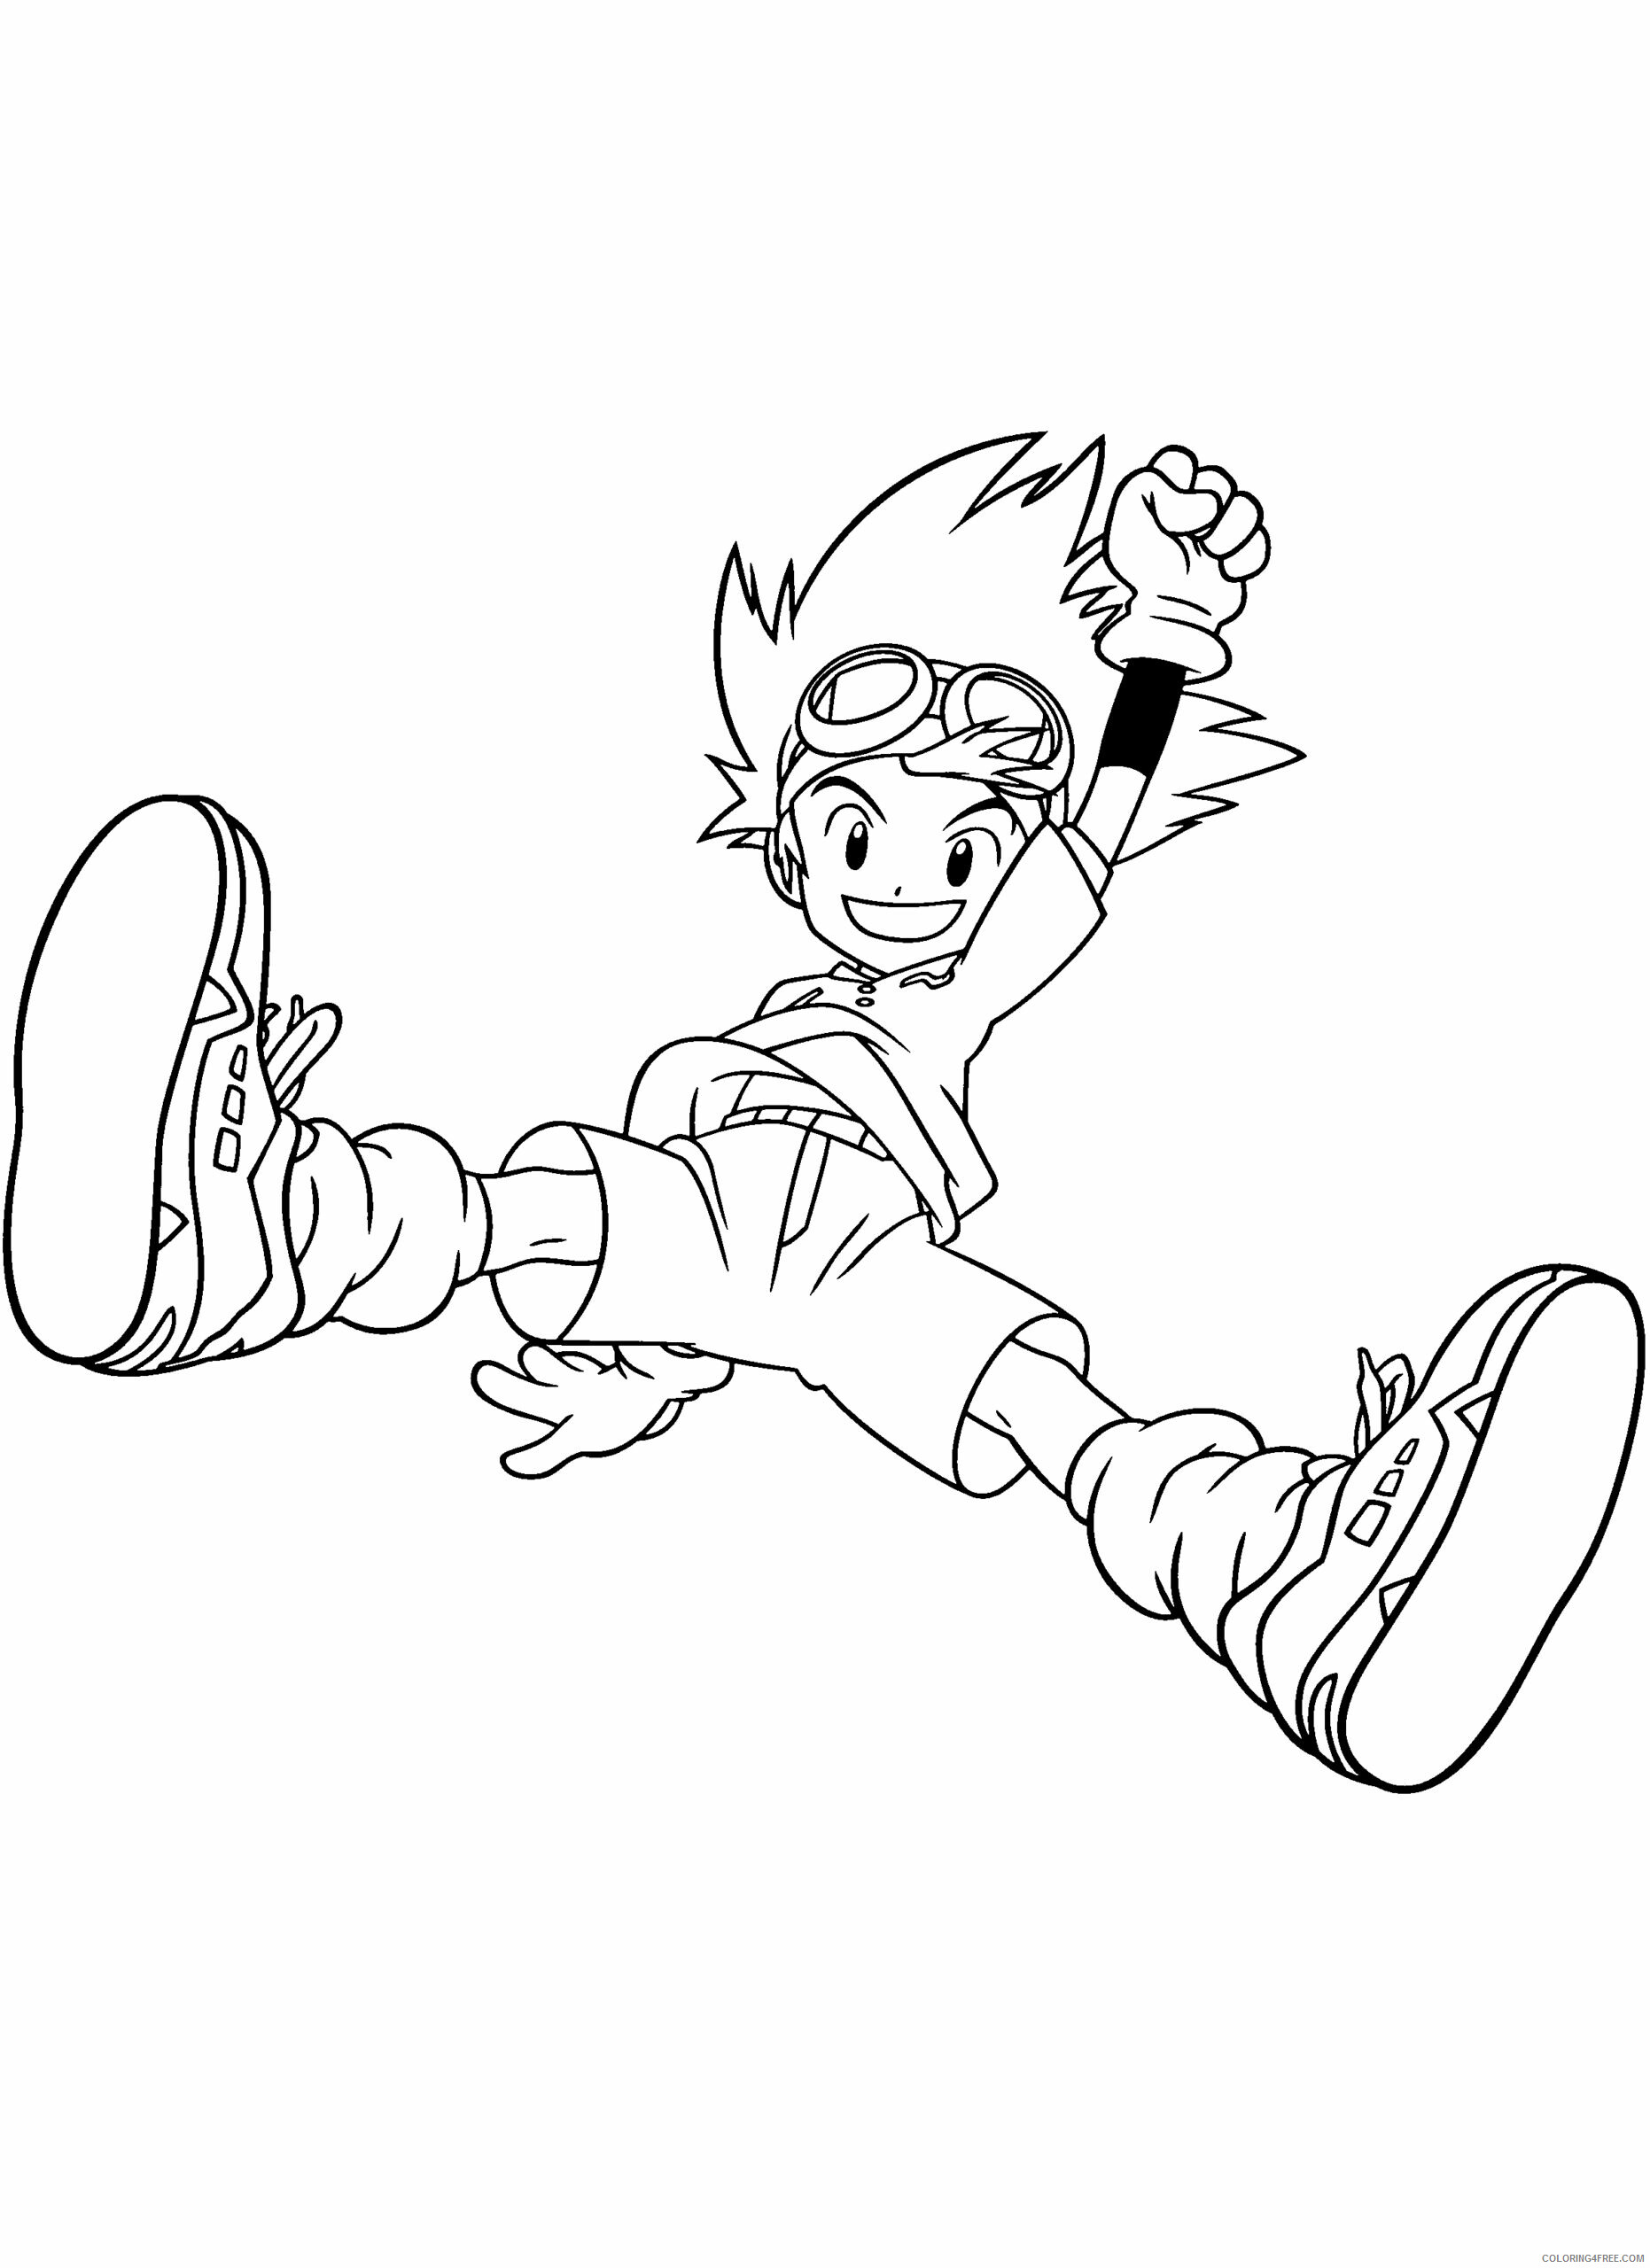 Digimon Printable Coloring Pages Anime digimon 85ZQ8 2021 0160 Coloring4free